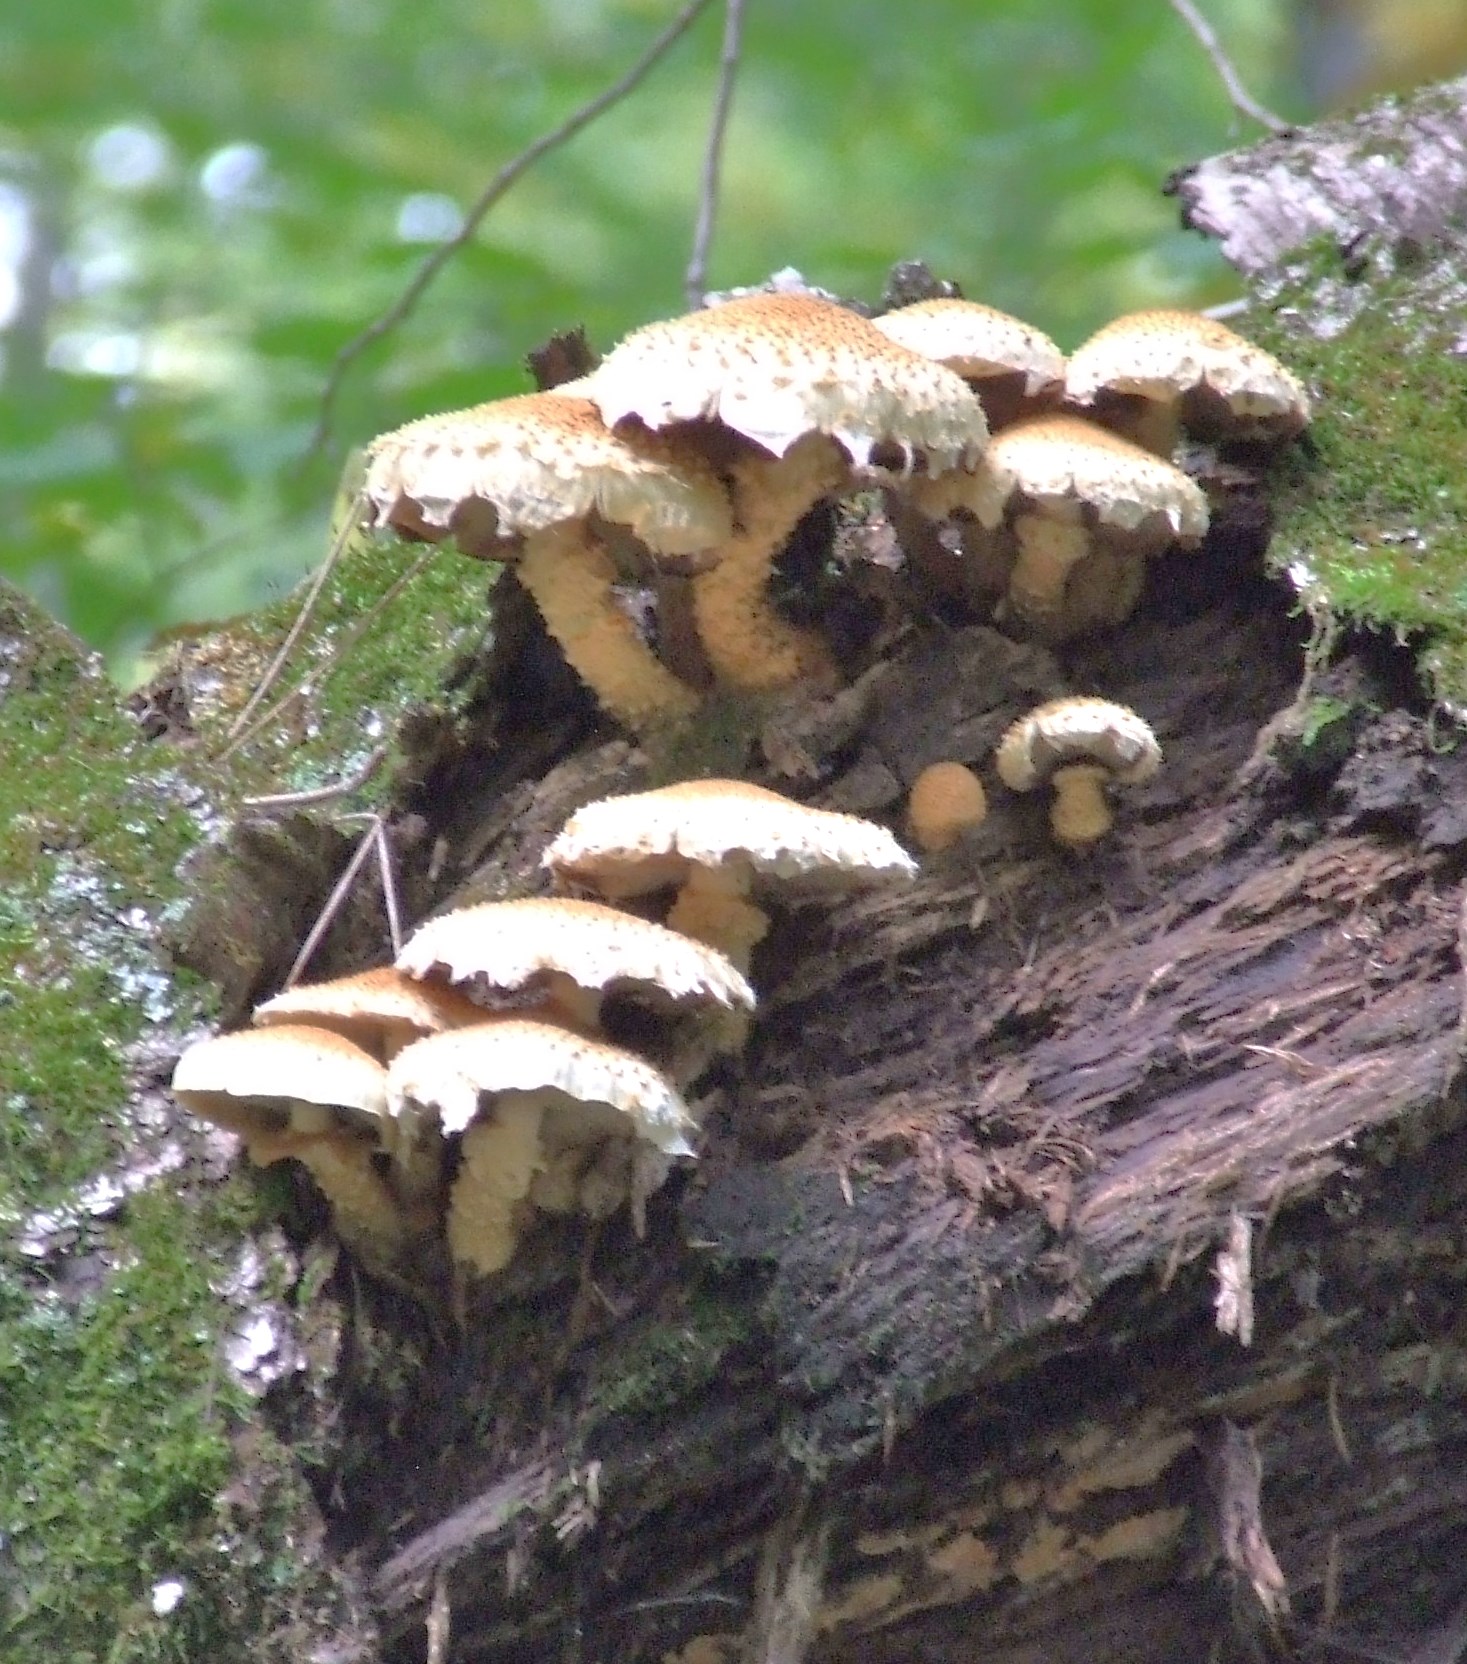 PRX » Piece » Hunting for wild mushrooms